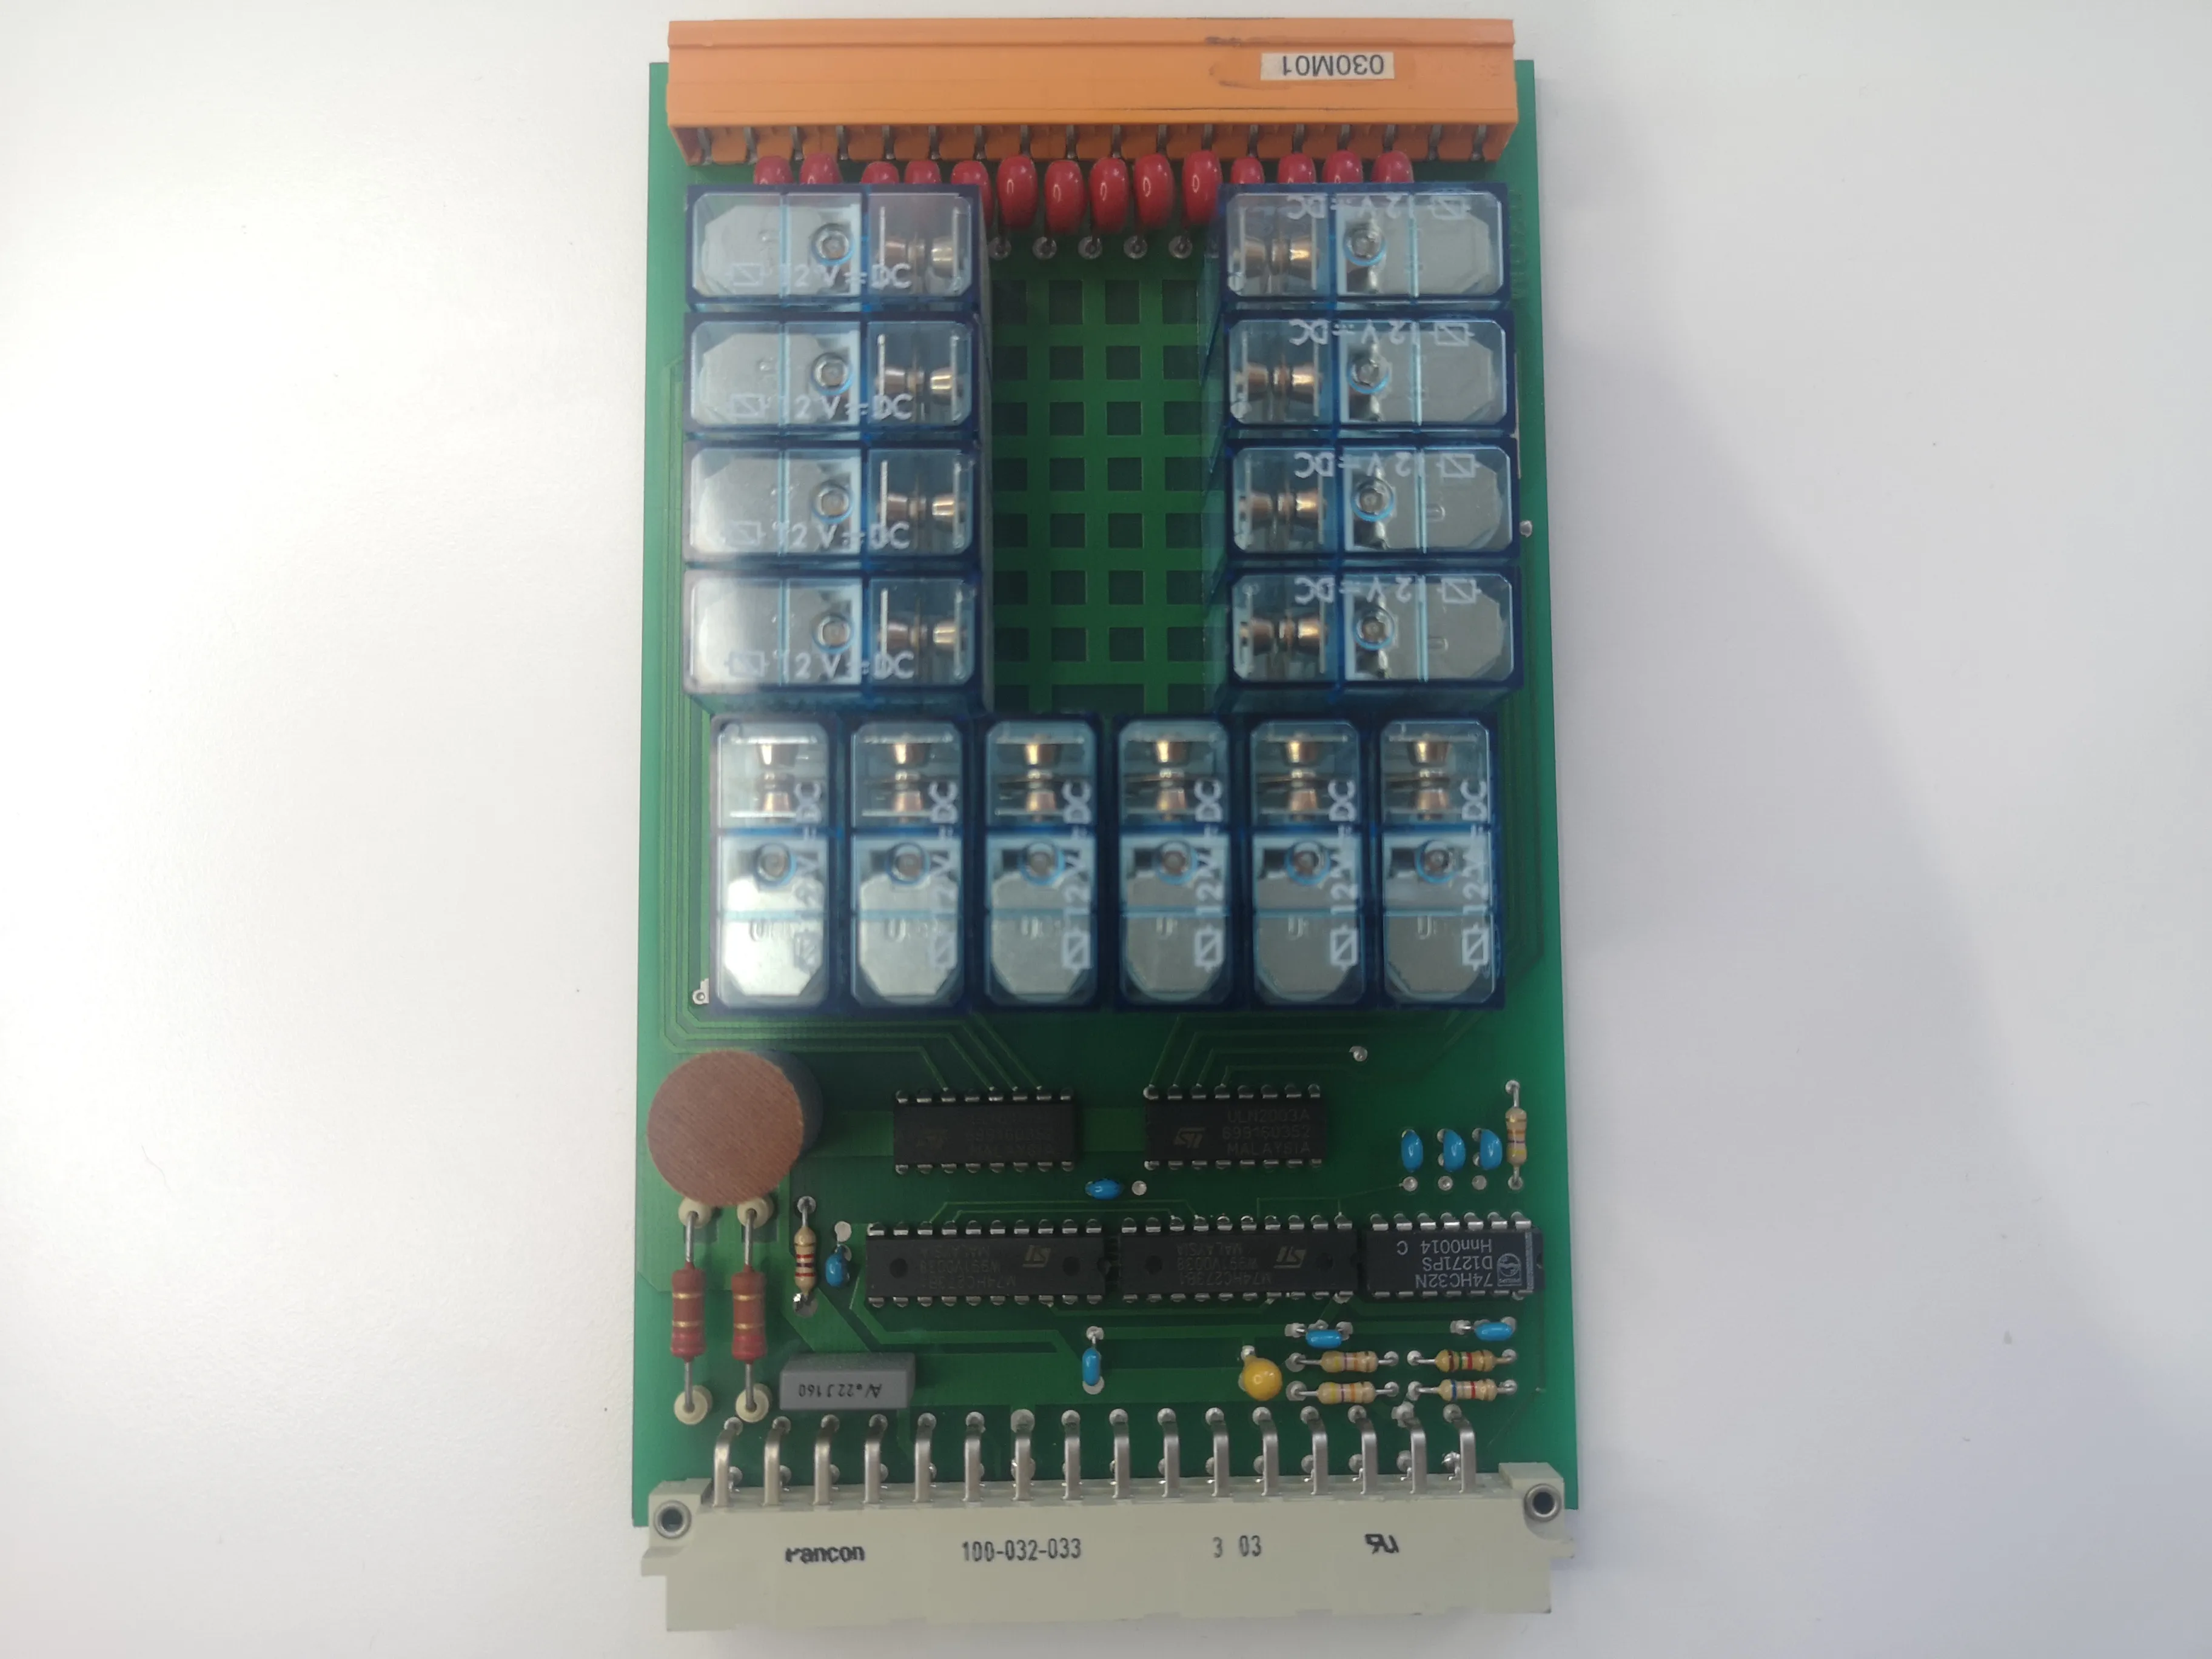 Image of the relay board